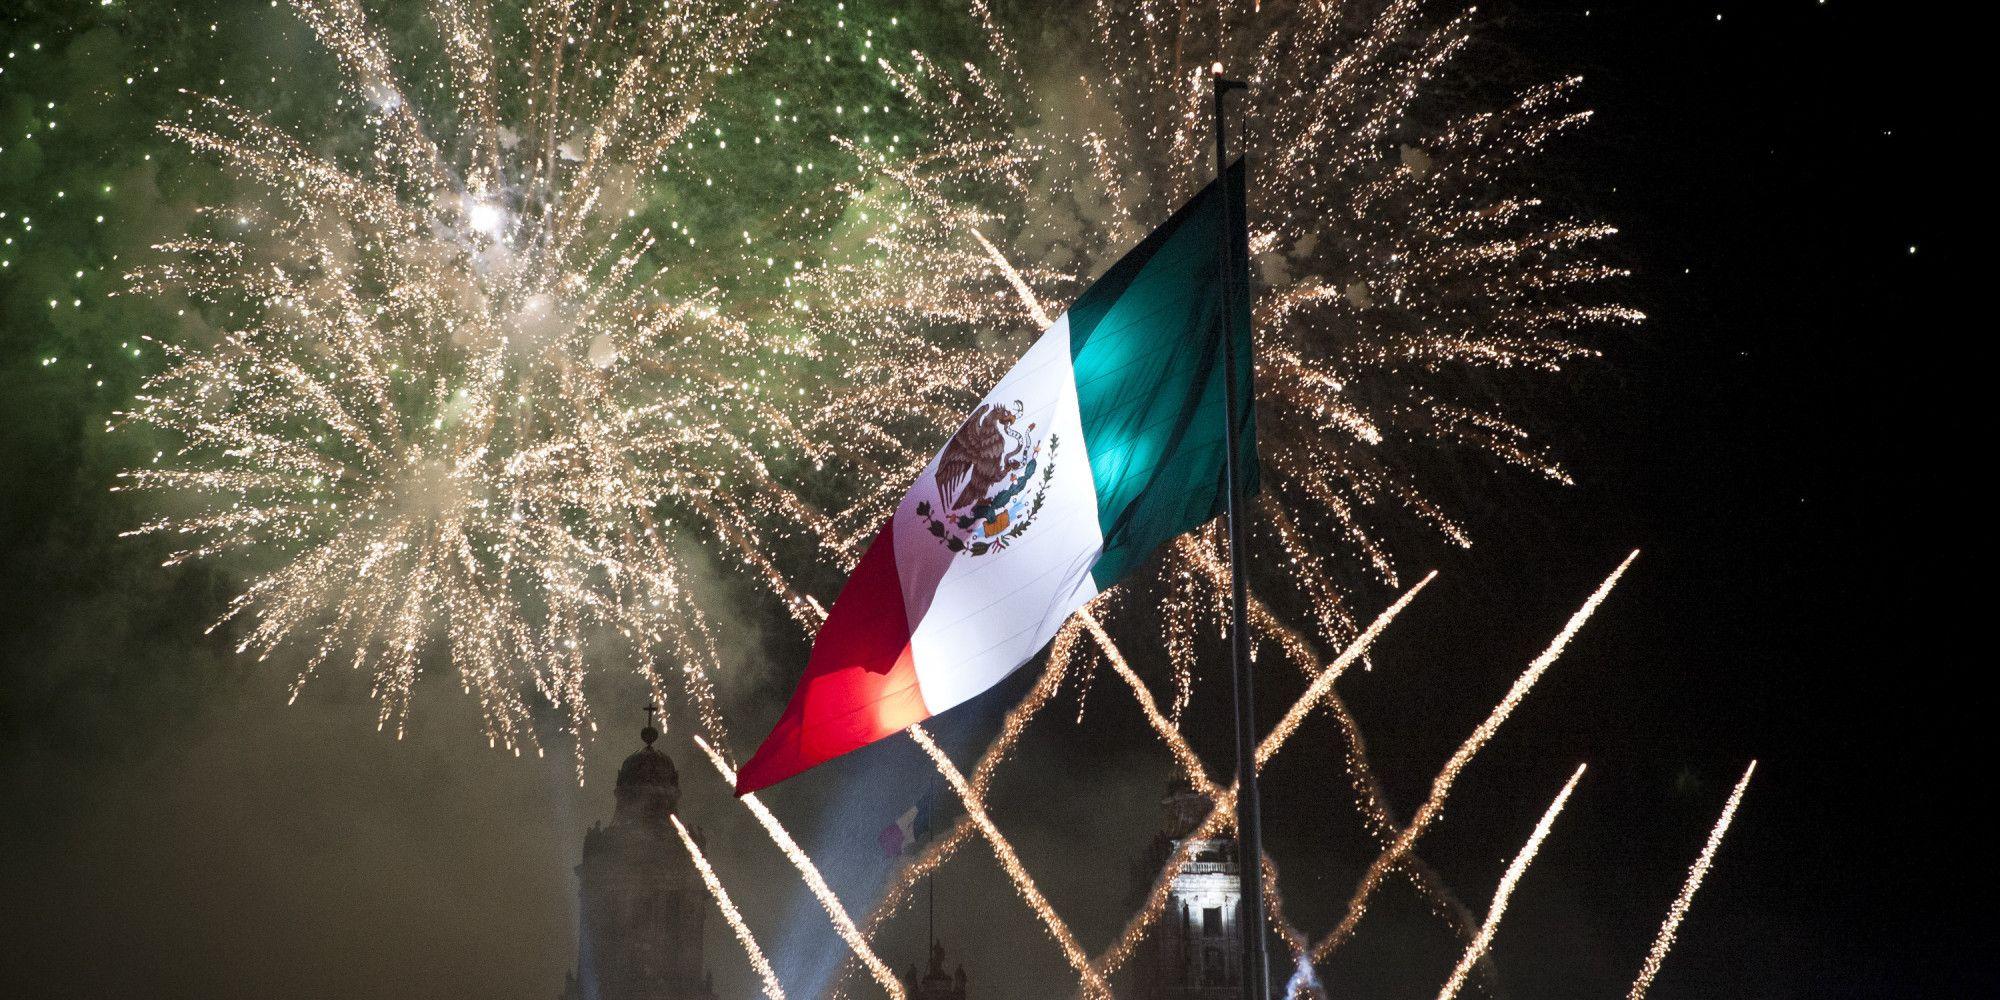 Celebrations of Mexico’s Independence Day